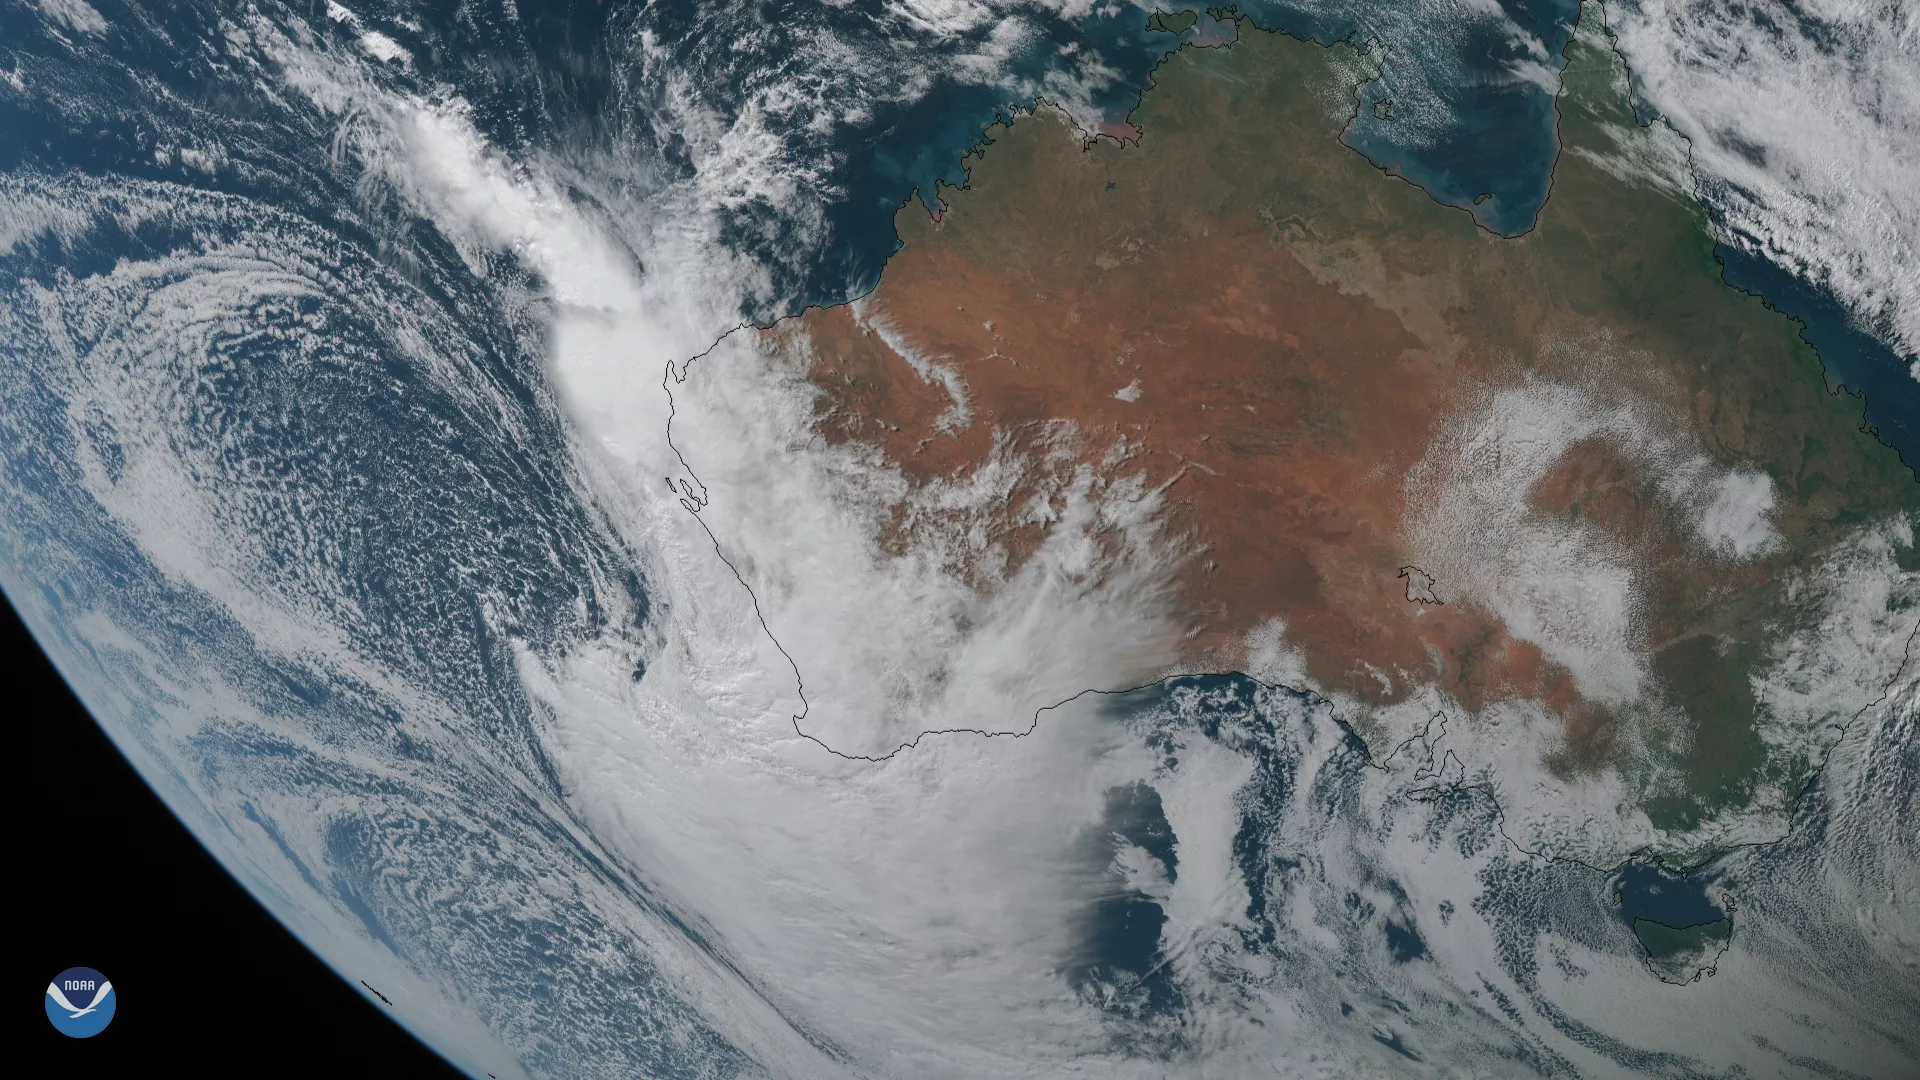 Image of a cyclone from space